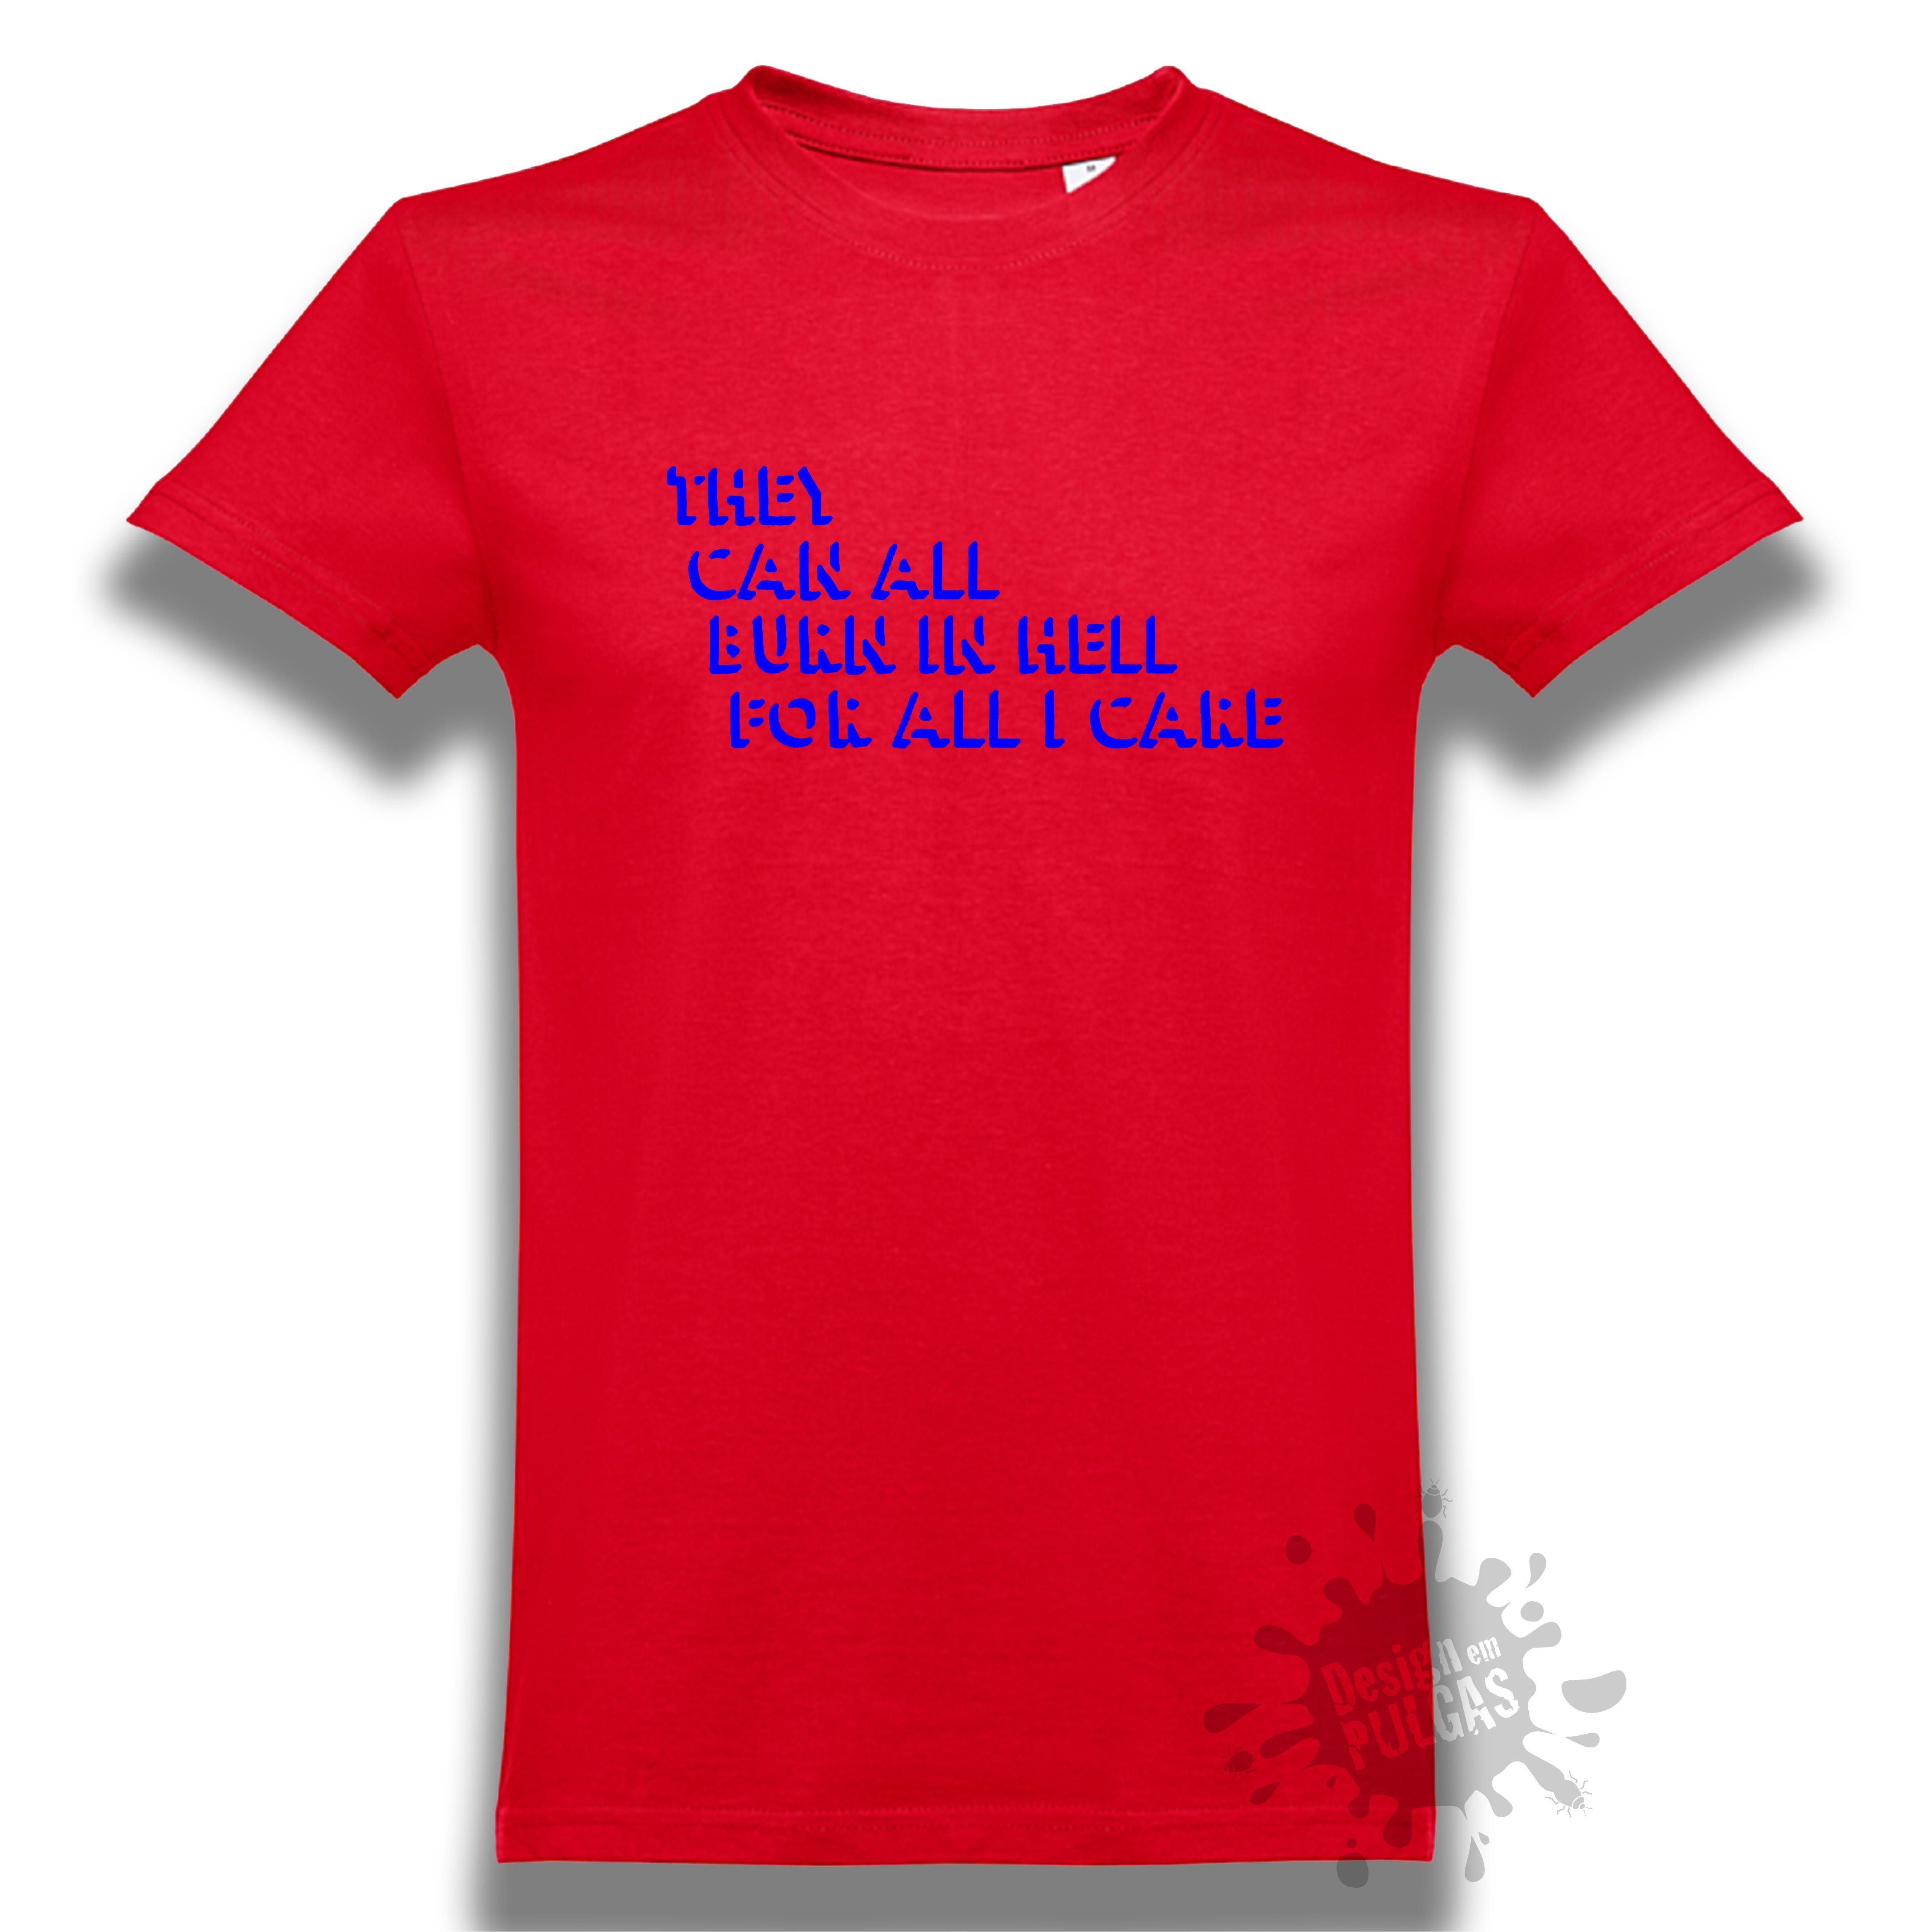 They Can All Burn In Hell For All I Care T-shirt - PORTES GRÁTIS